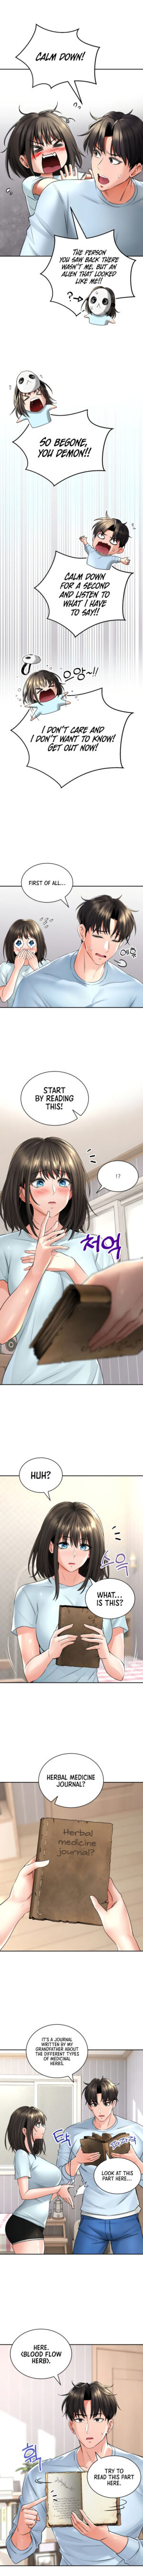 [Lee Juwon] Herbal Love Story (1-22) [English] [Omega Scans] [Ongoing]